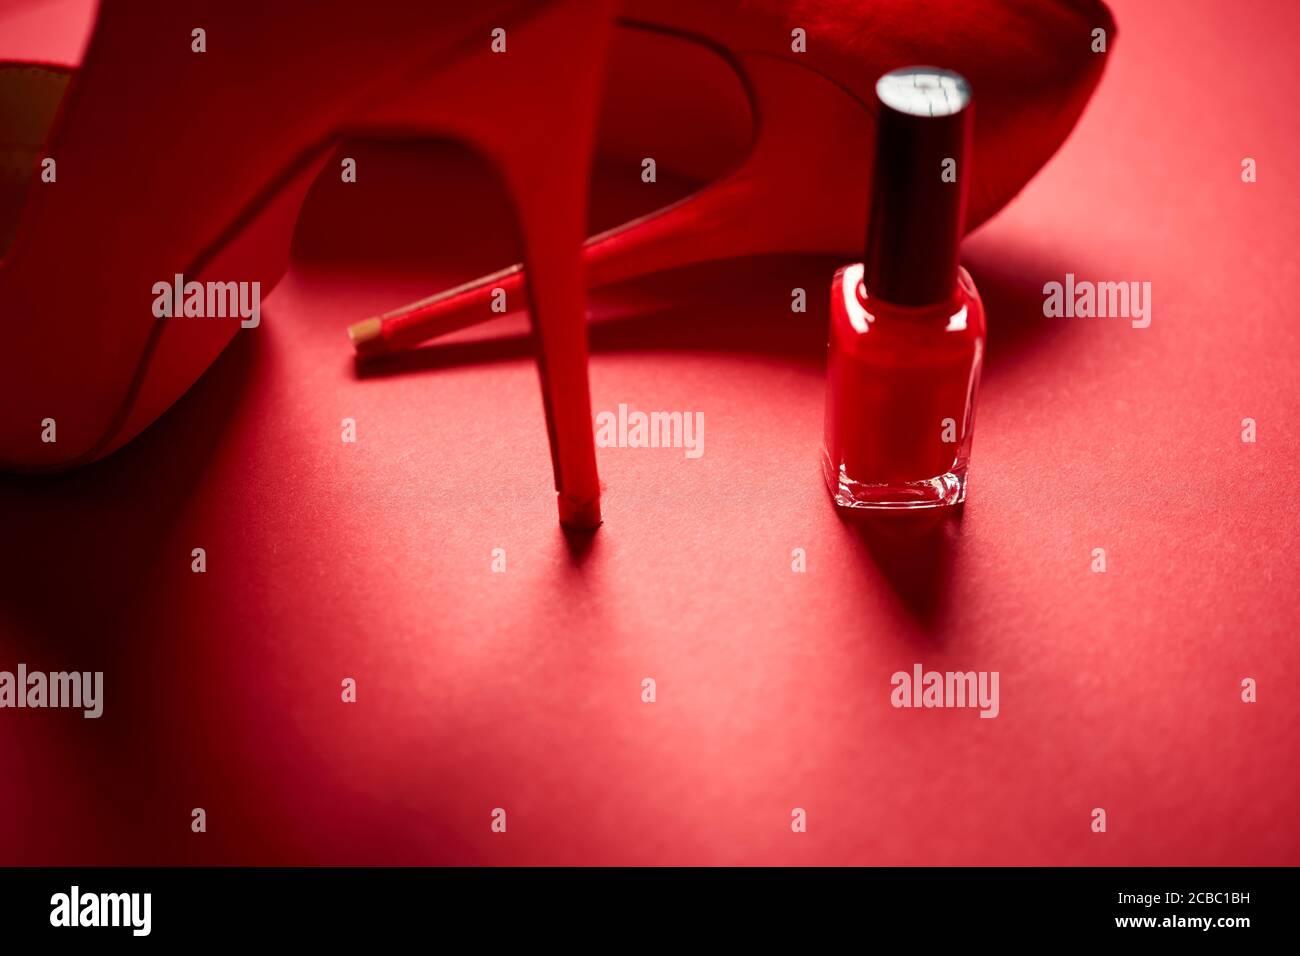 red high heel shoes and nail polish on a minimalist background Stock Photo